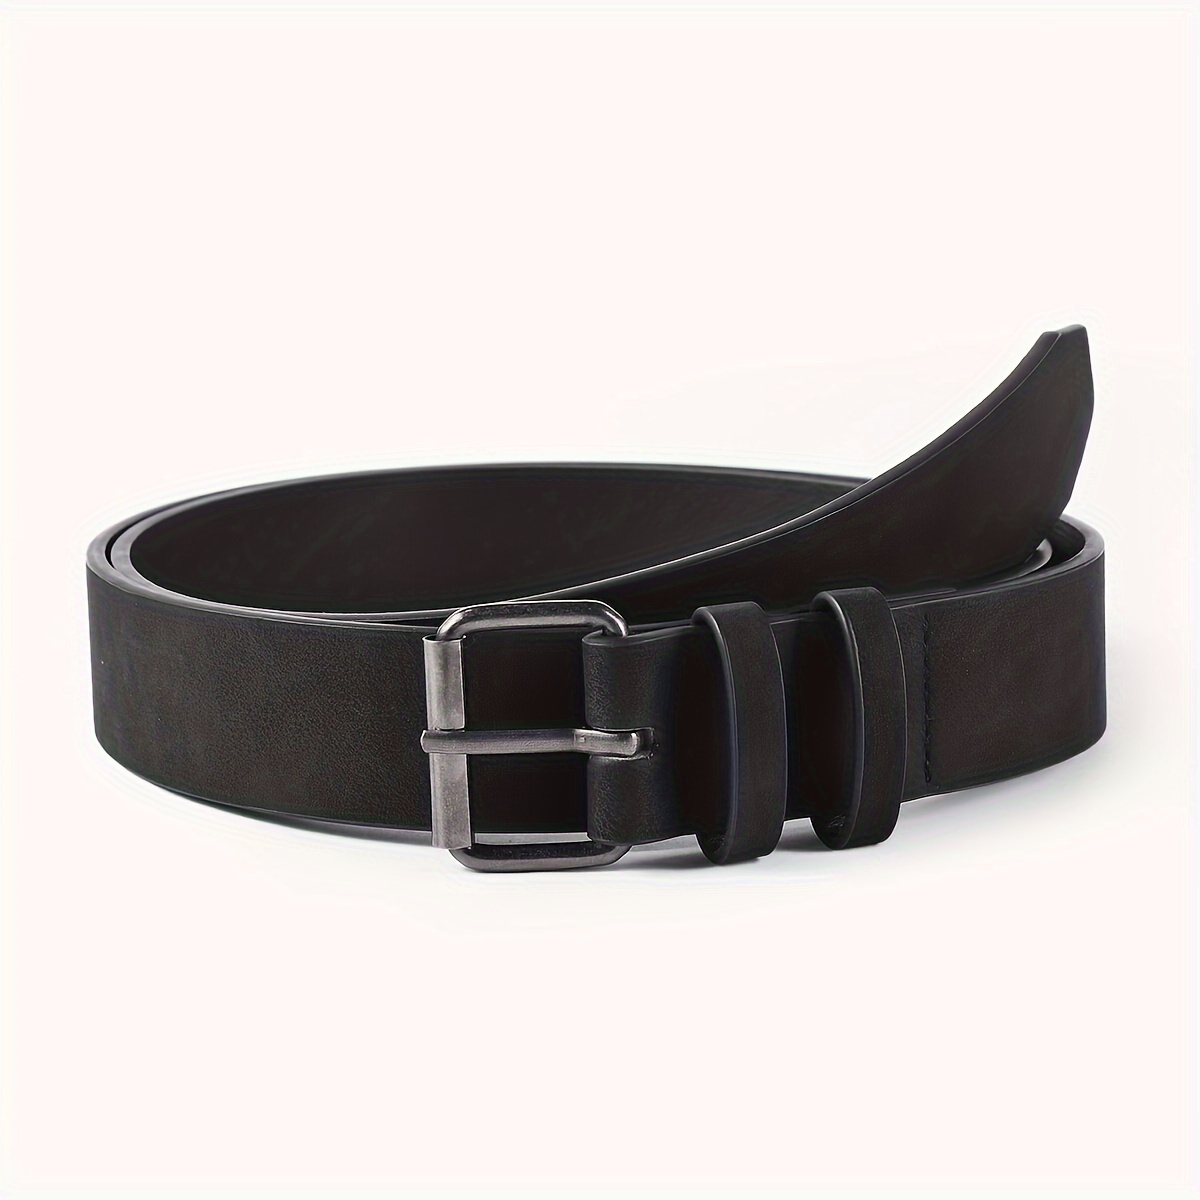 

Unisex Black Faux Leather Fashion Belt, Simple And Versatile, Western Cowboy Style, Ideal For Daily And Dressy Wear